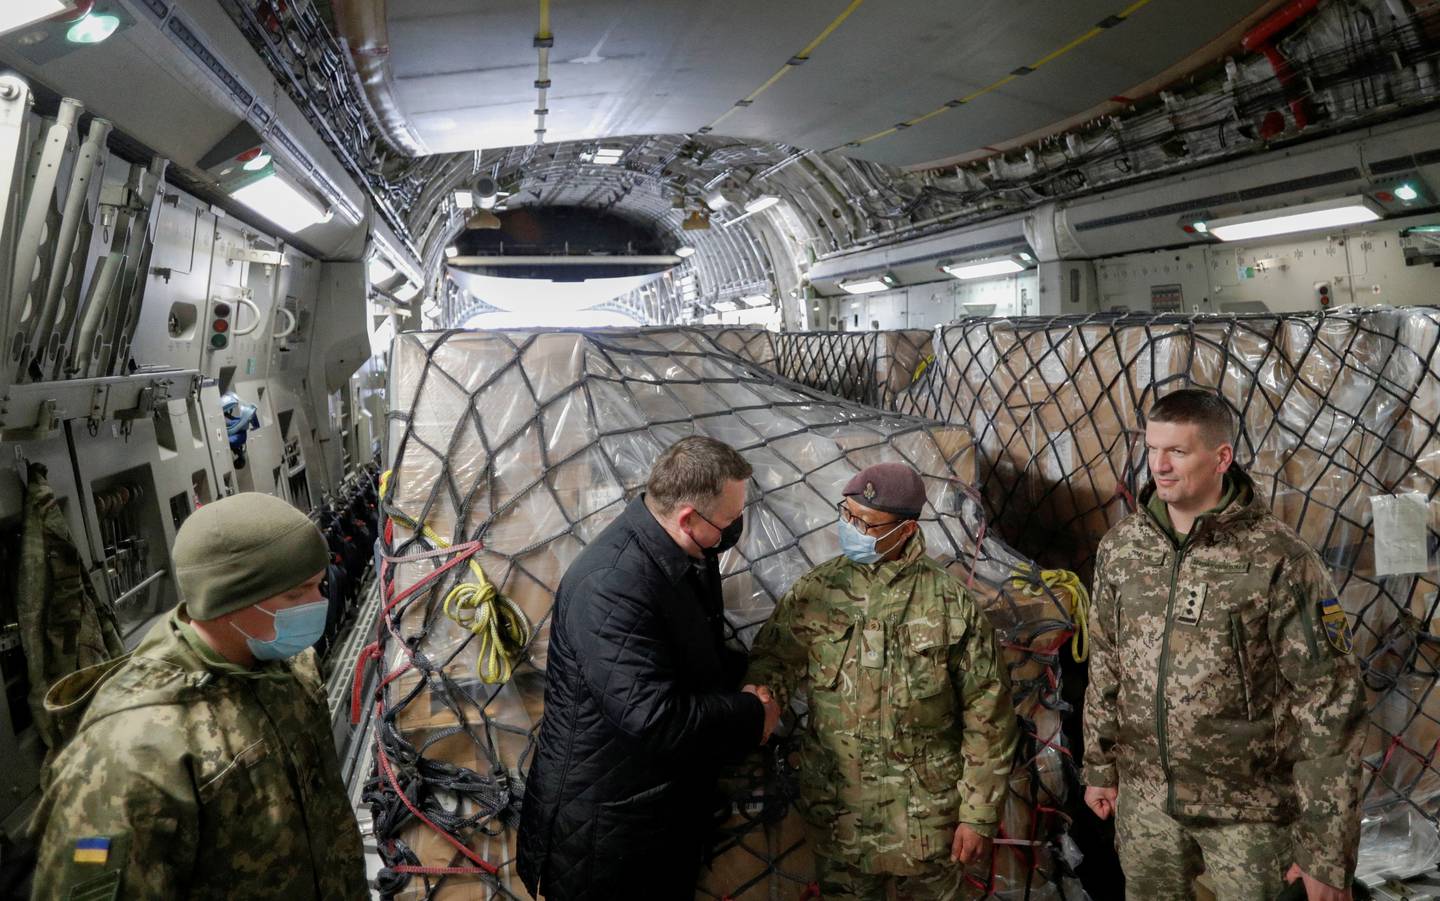 Officials, including British and Ukrainian service members, before unloading Britain's security support package for Ukraine, at Boryspil International Airport, outside Kyiv. Reuters